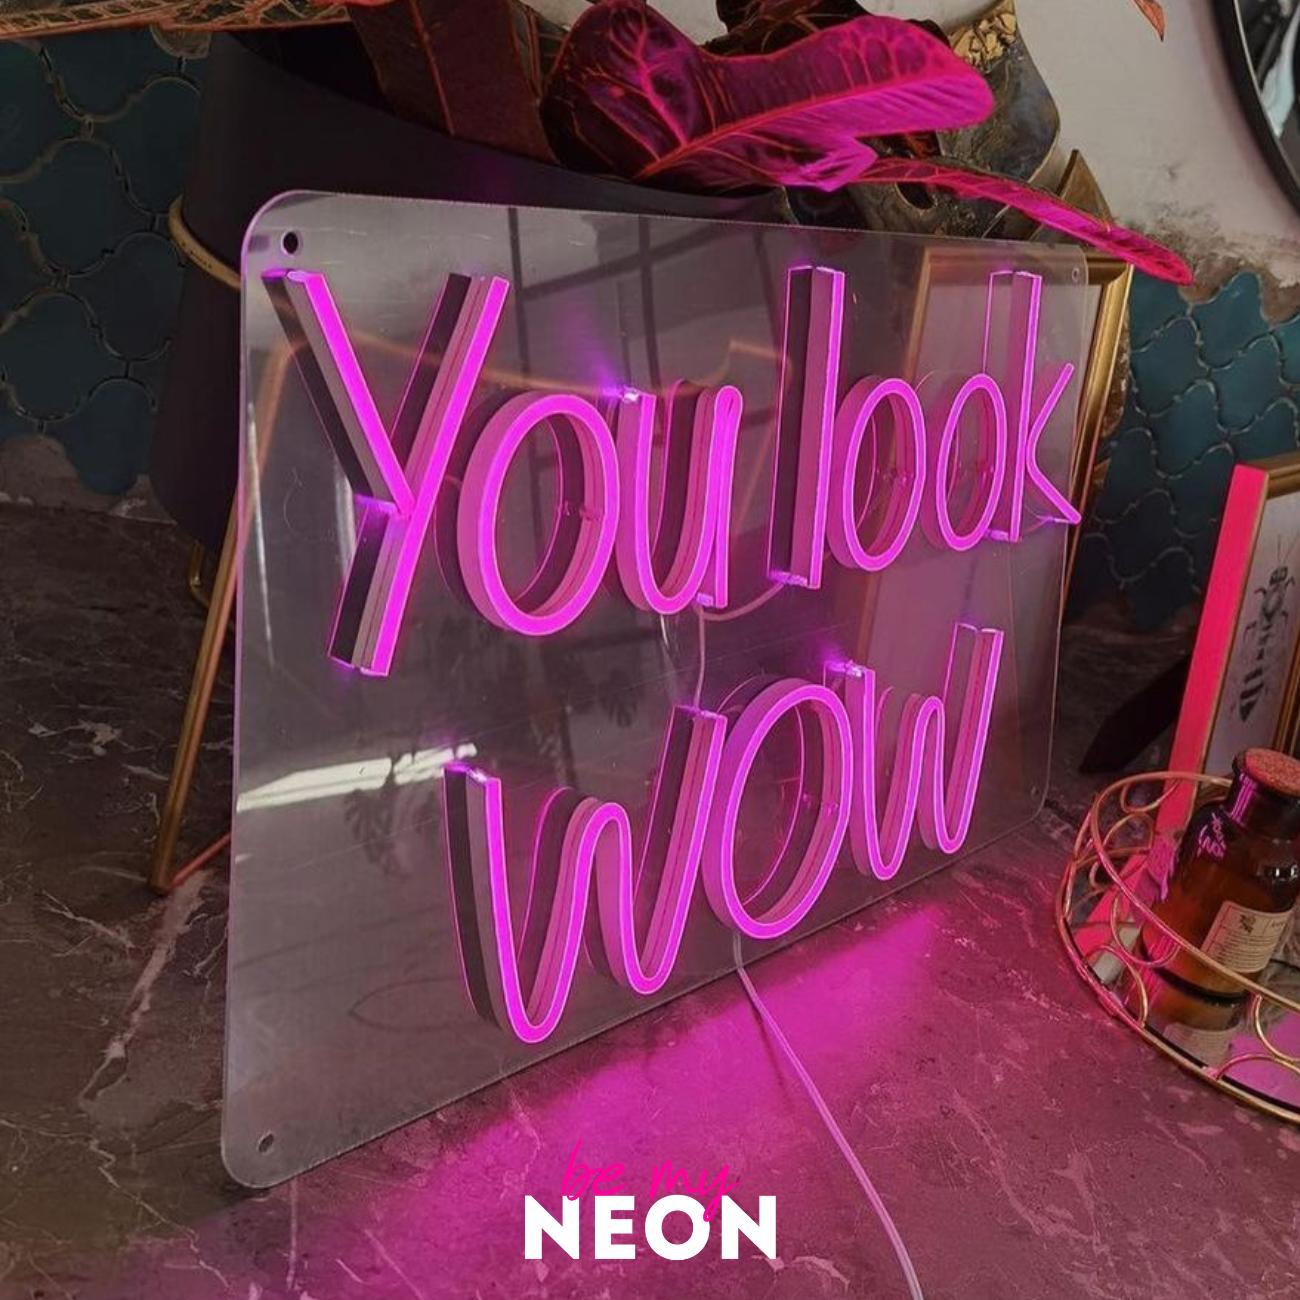 "you look wow" LED Neonschild